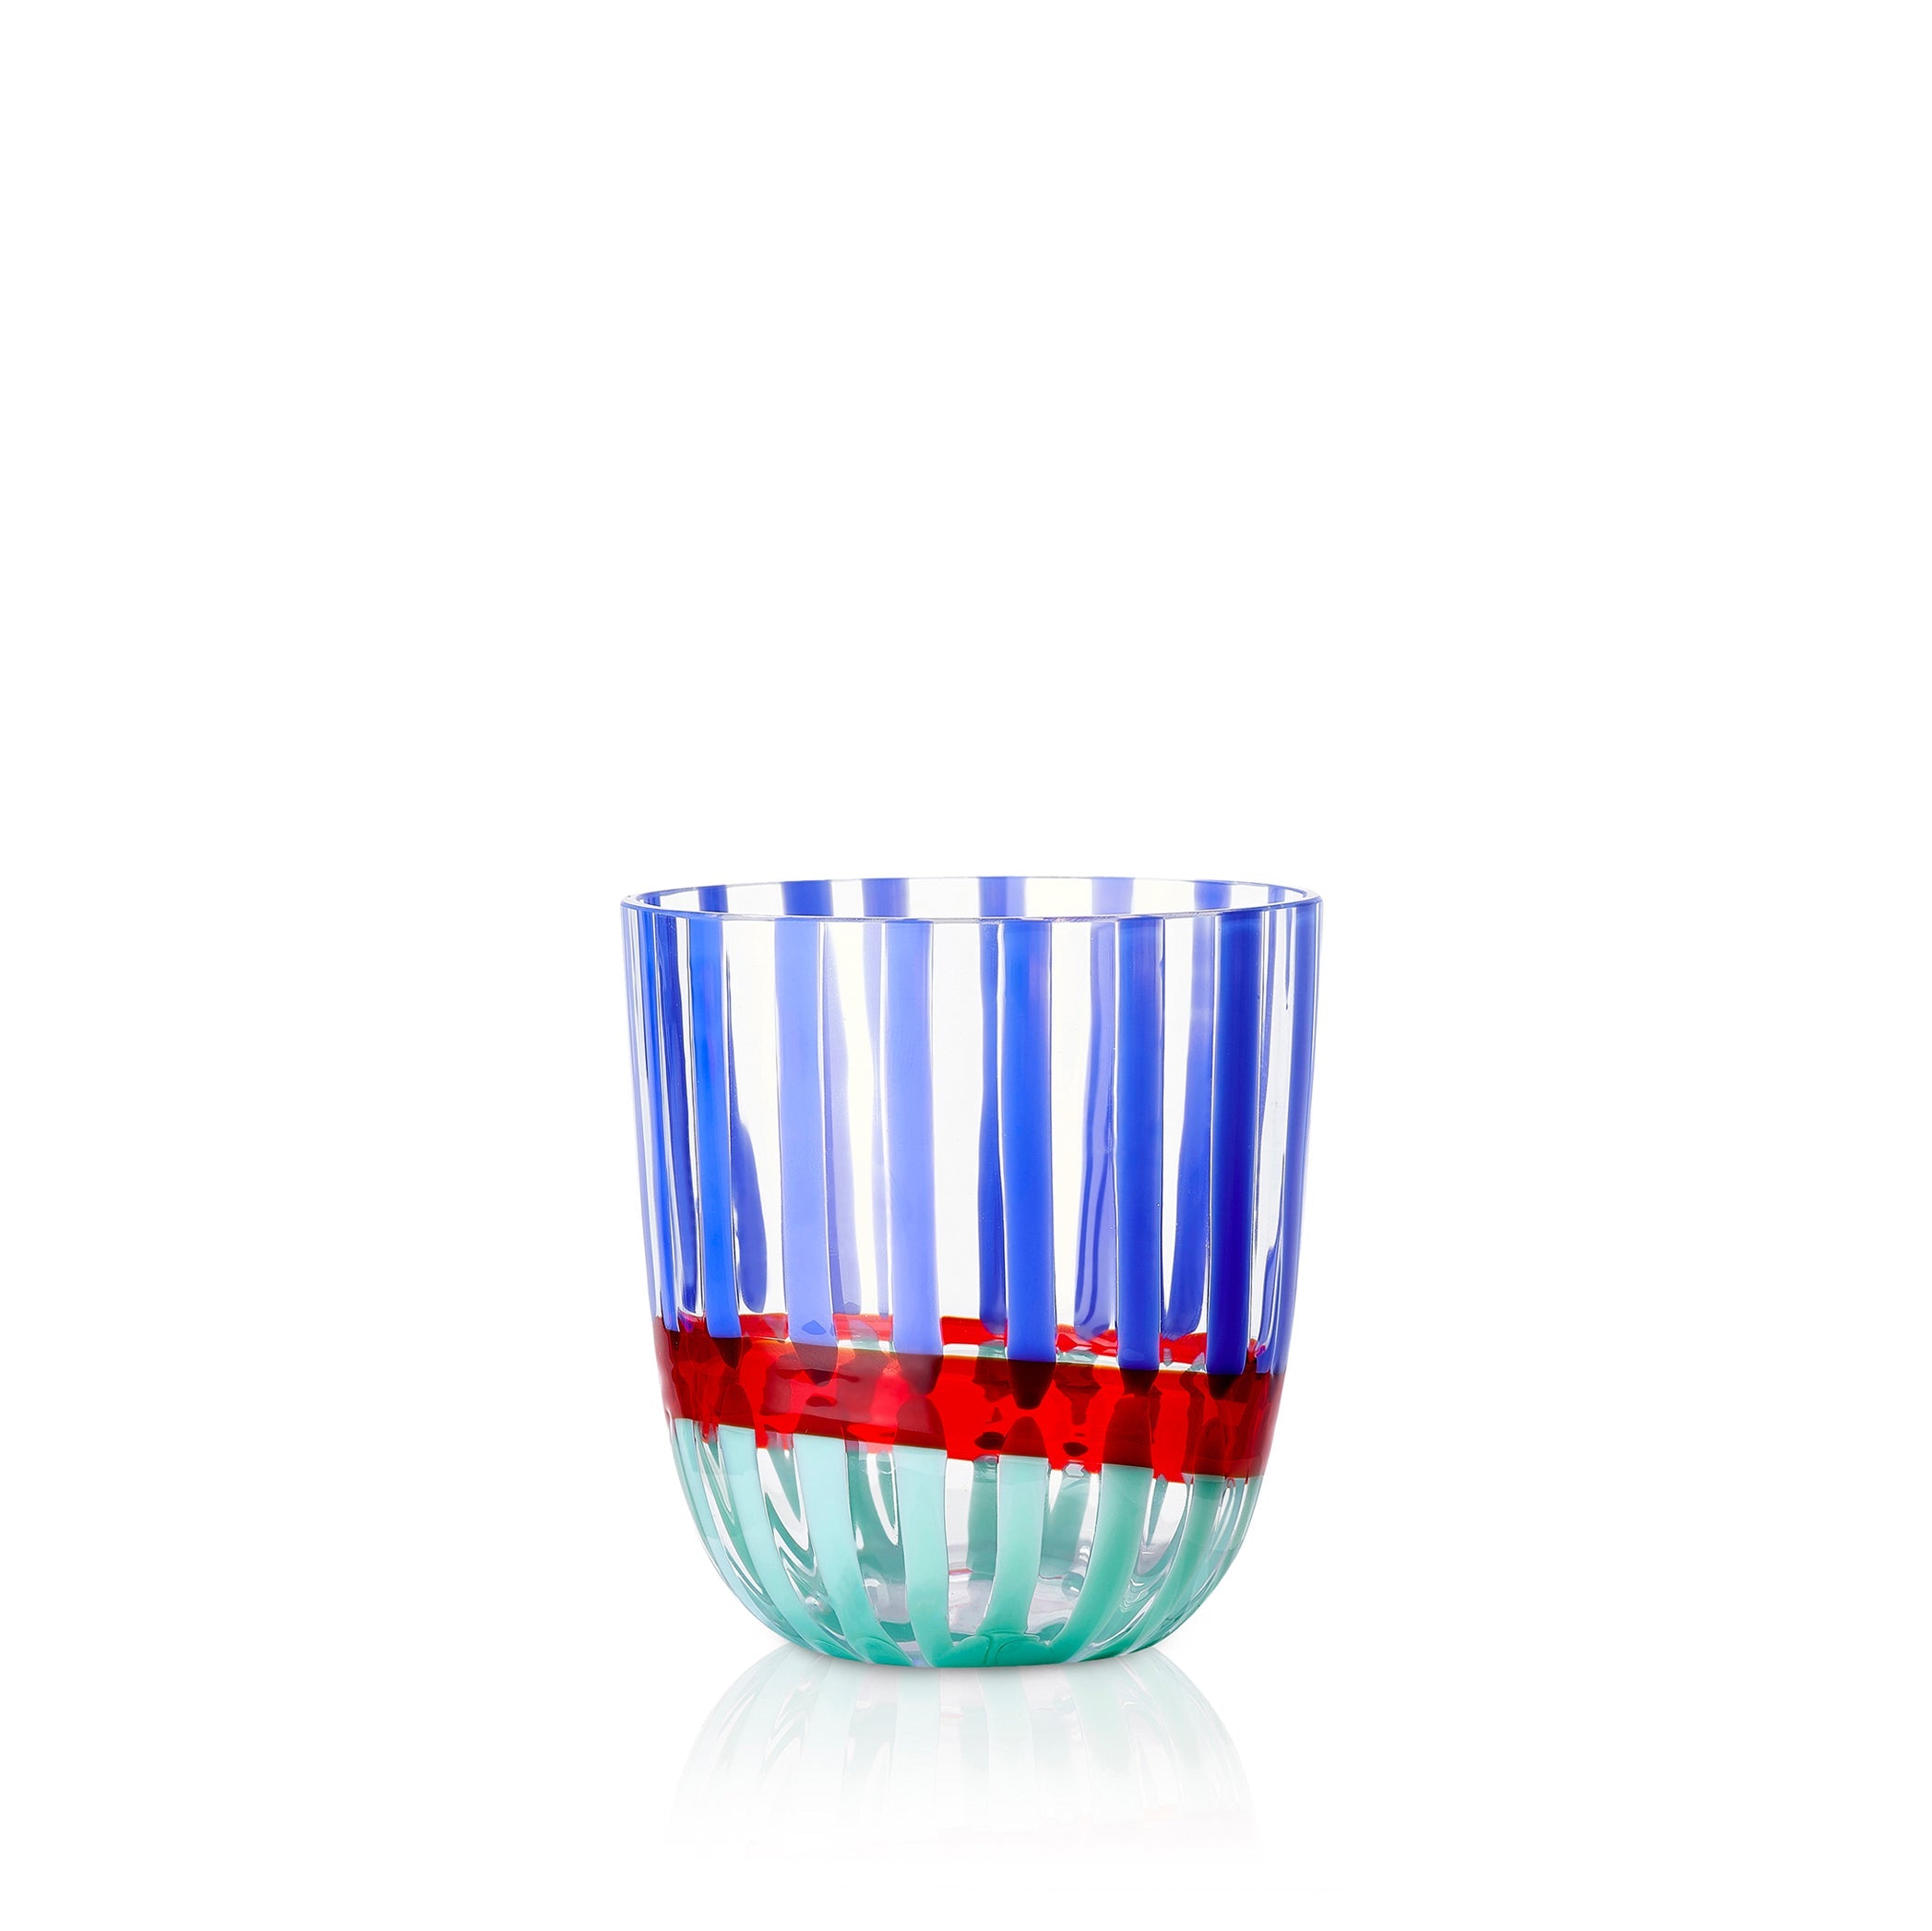 Set of Two Handblown Double Stripe Glass Tumblers in Sky Blue, Red & Teal, 8.5cm